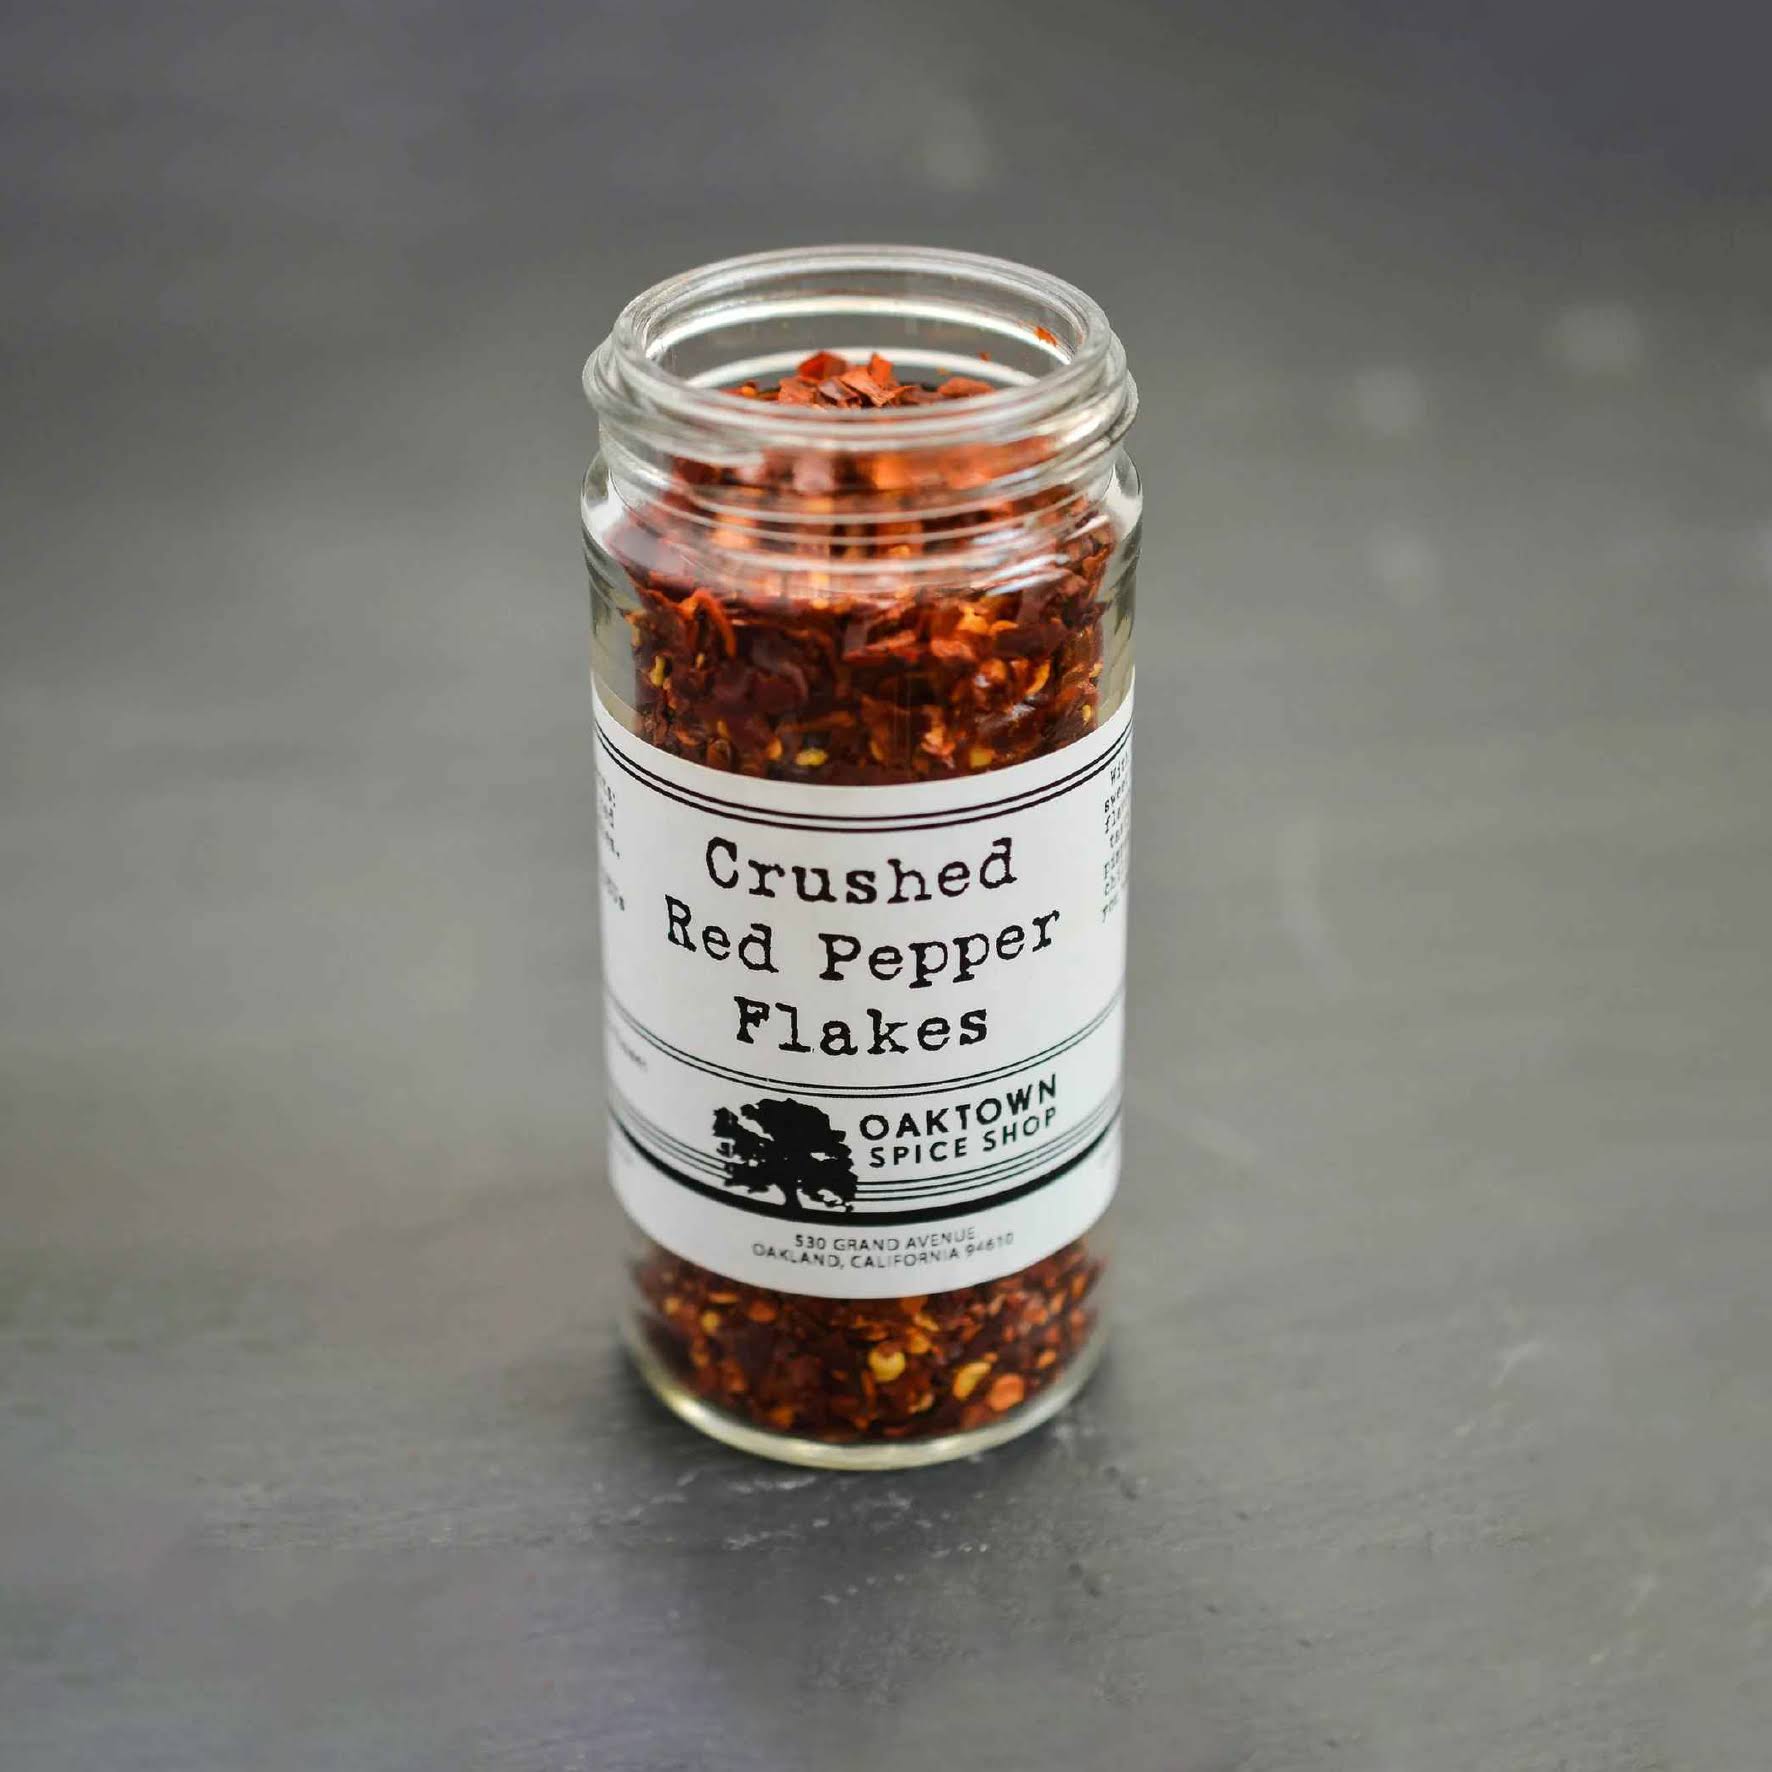 Oaktown Spice Shop Crushed Red Pepper Flakes - 1.3 oz